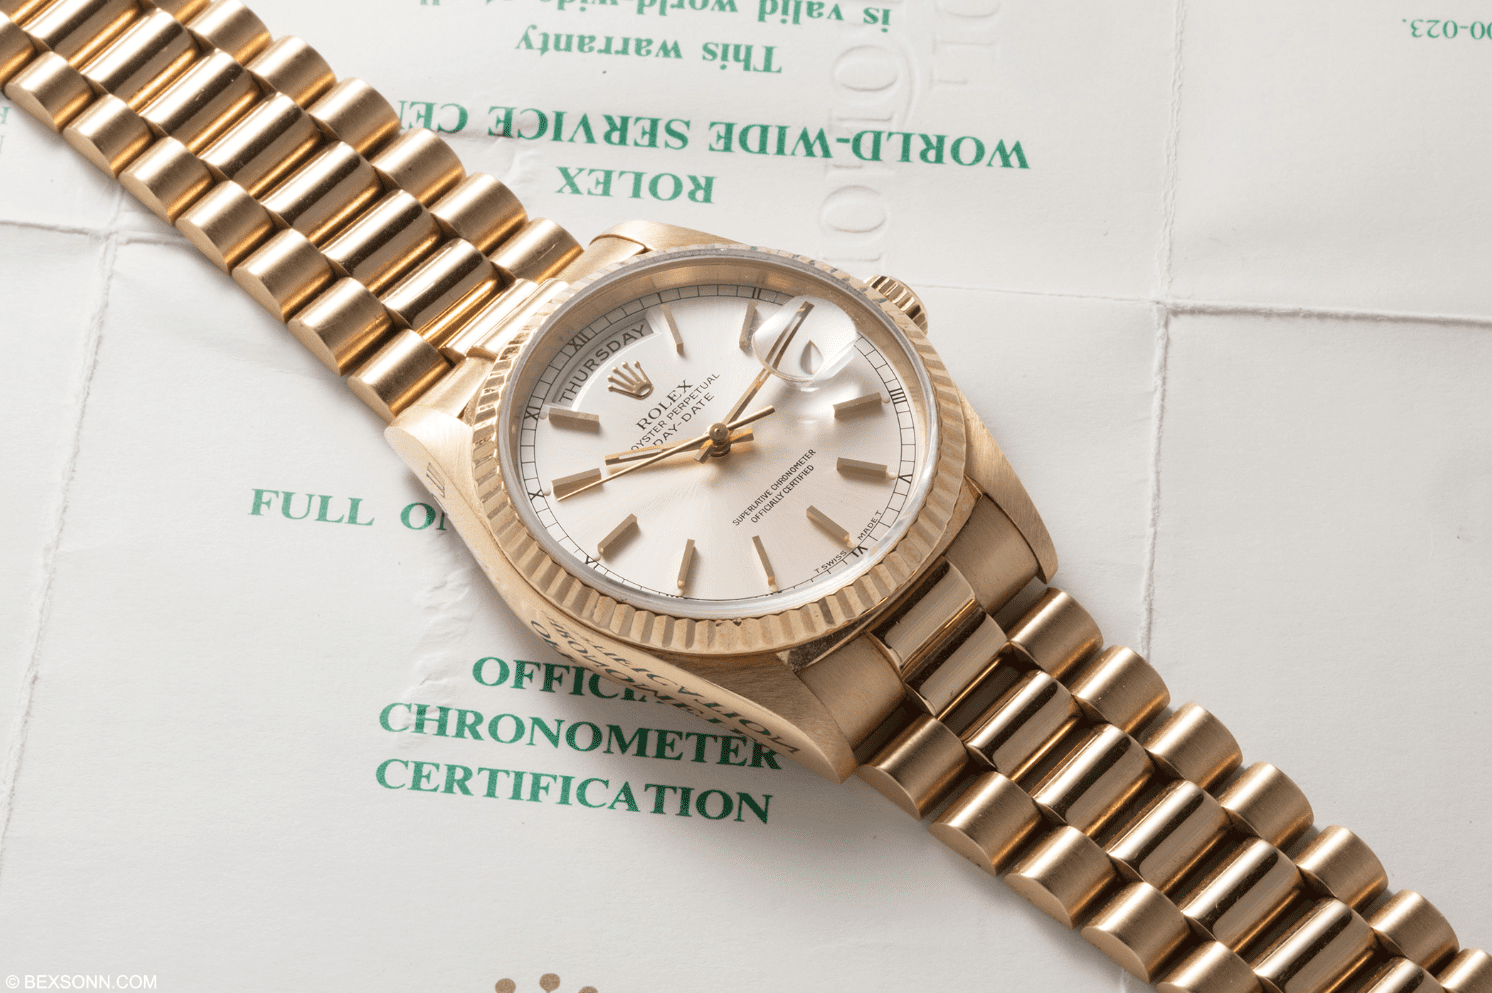 Rolex Day-Date is still the ultimate watch of ballers and shot-callers